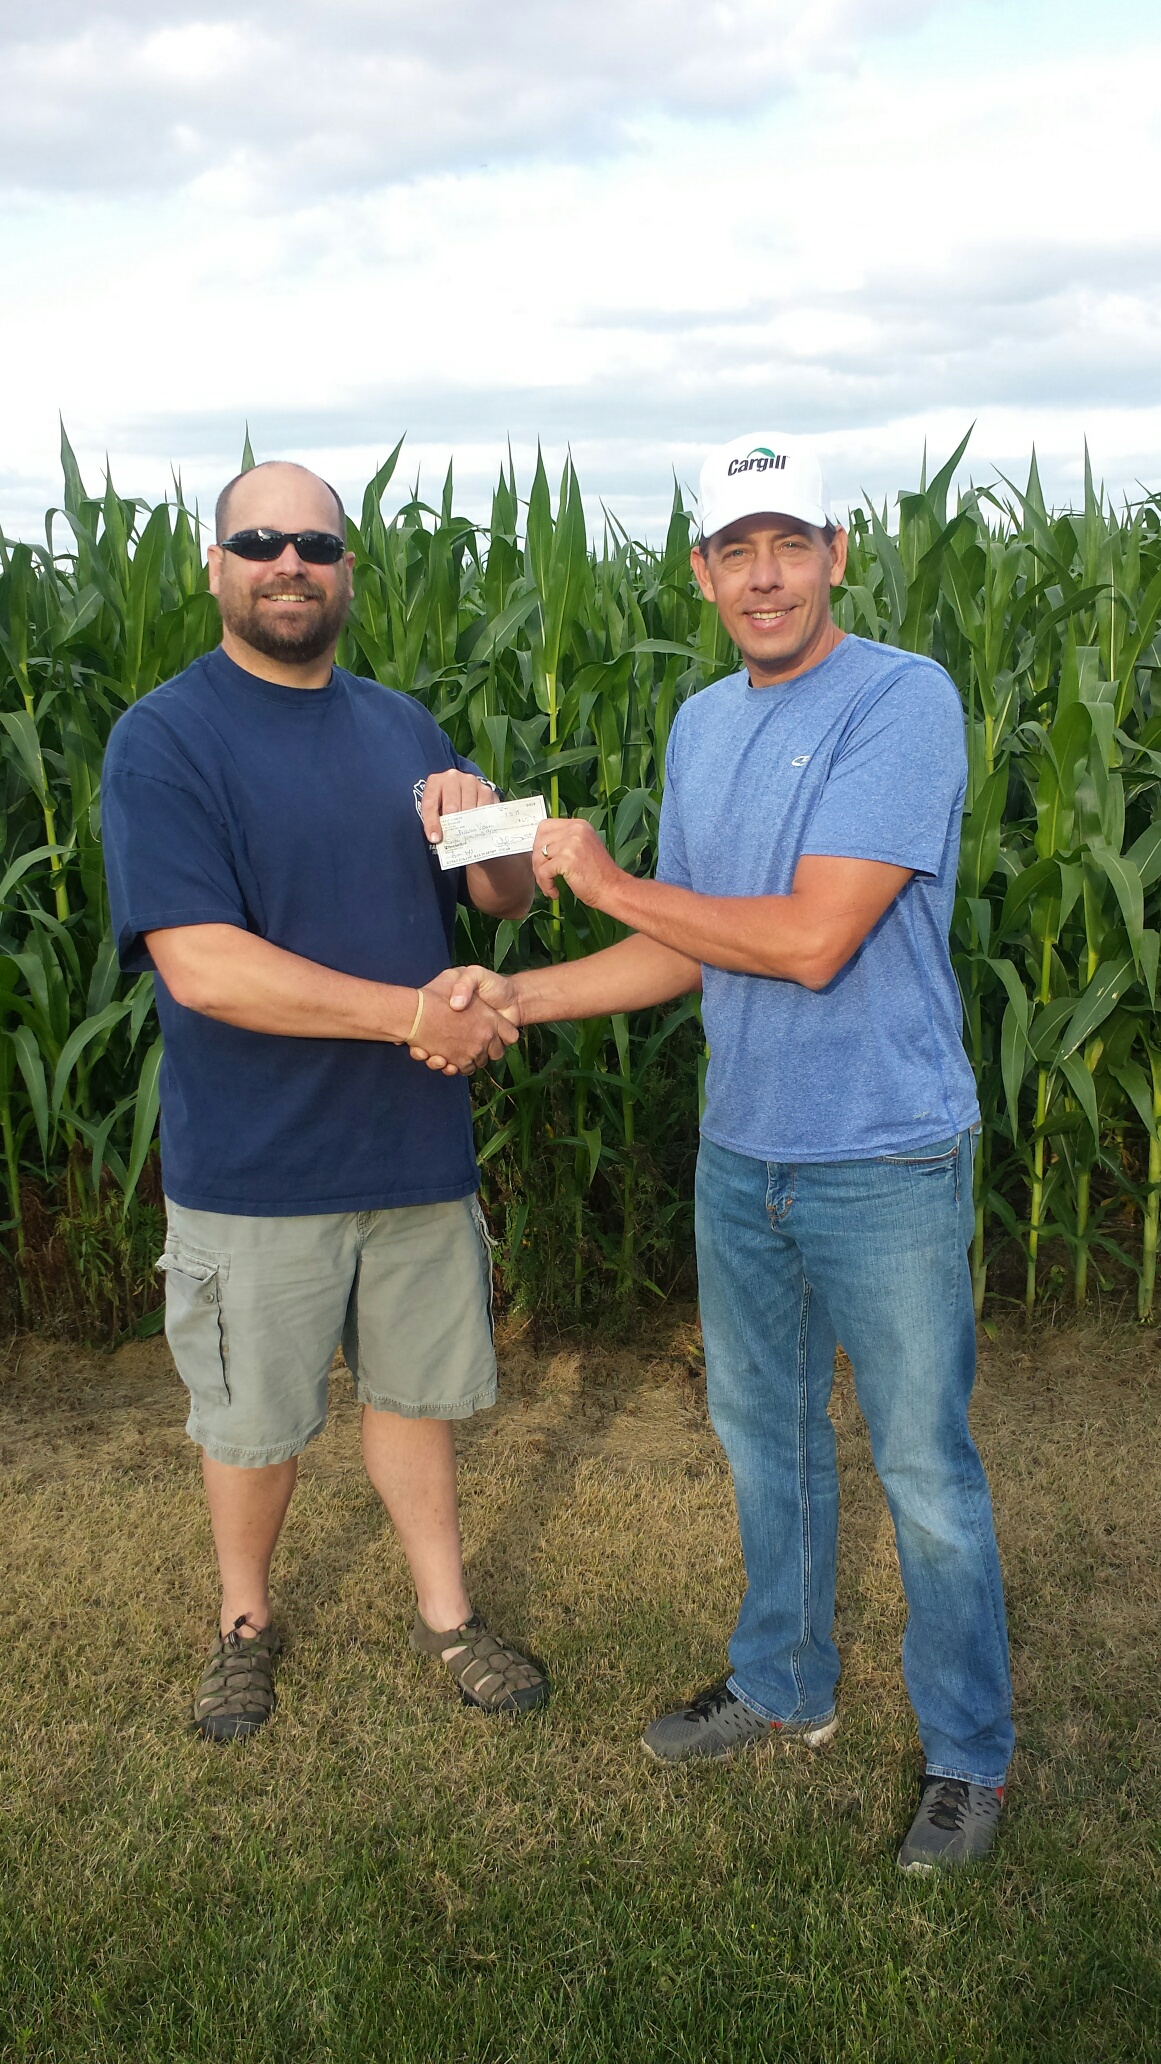 Cargill Donating Check -  Brandon Evans with the Badger Fire and Rescue  & Alan Viaene, Cargill Facility Manager at Fort Dodge.